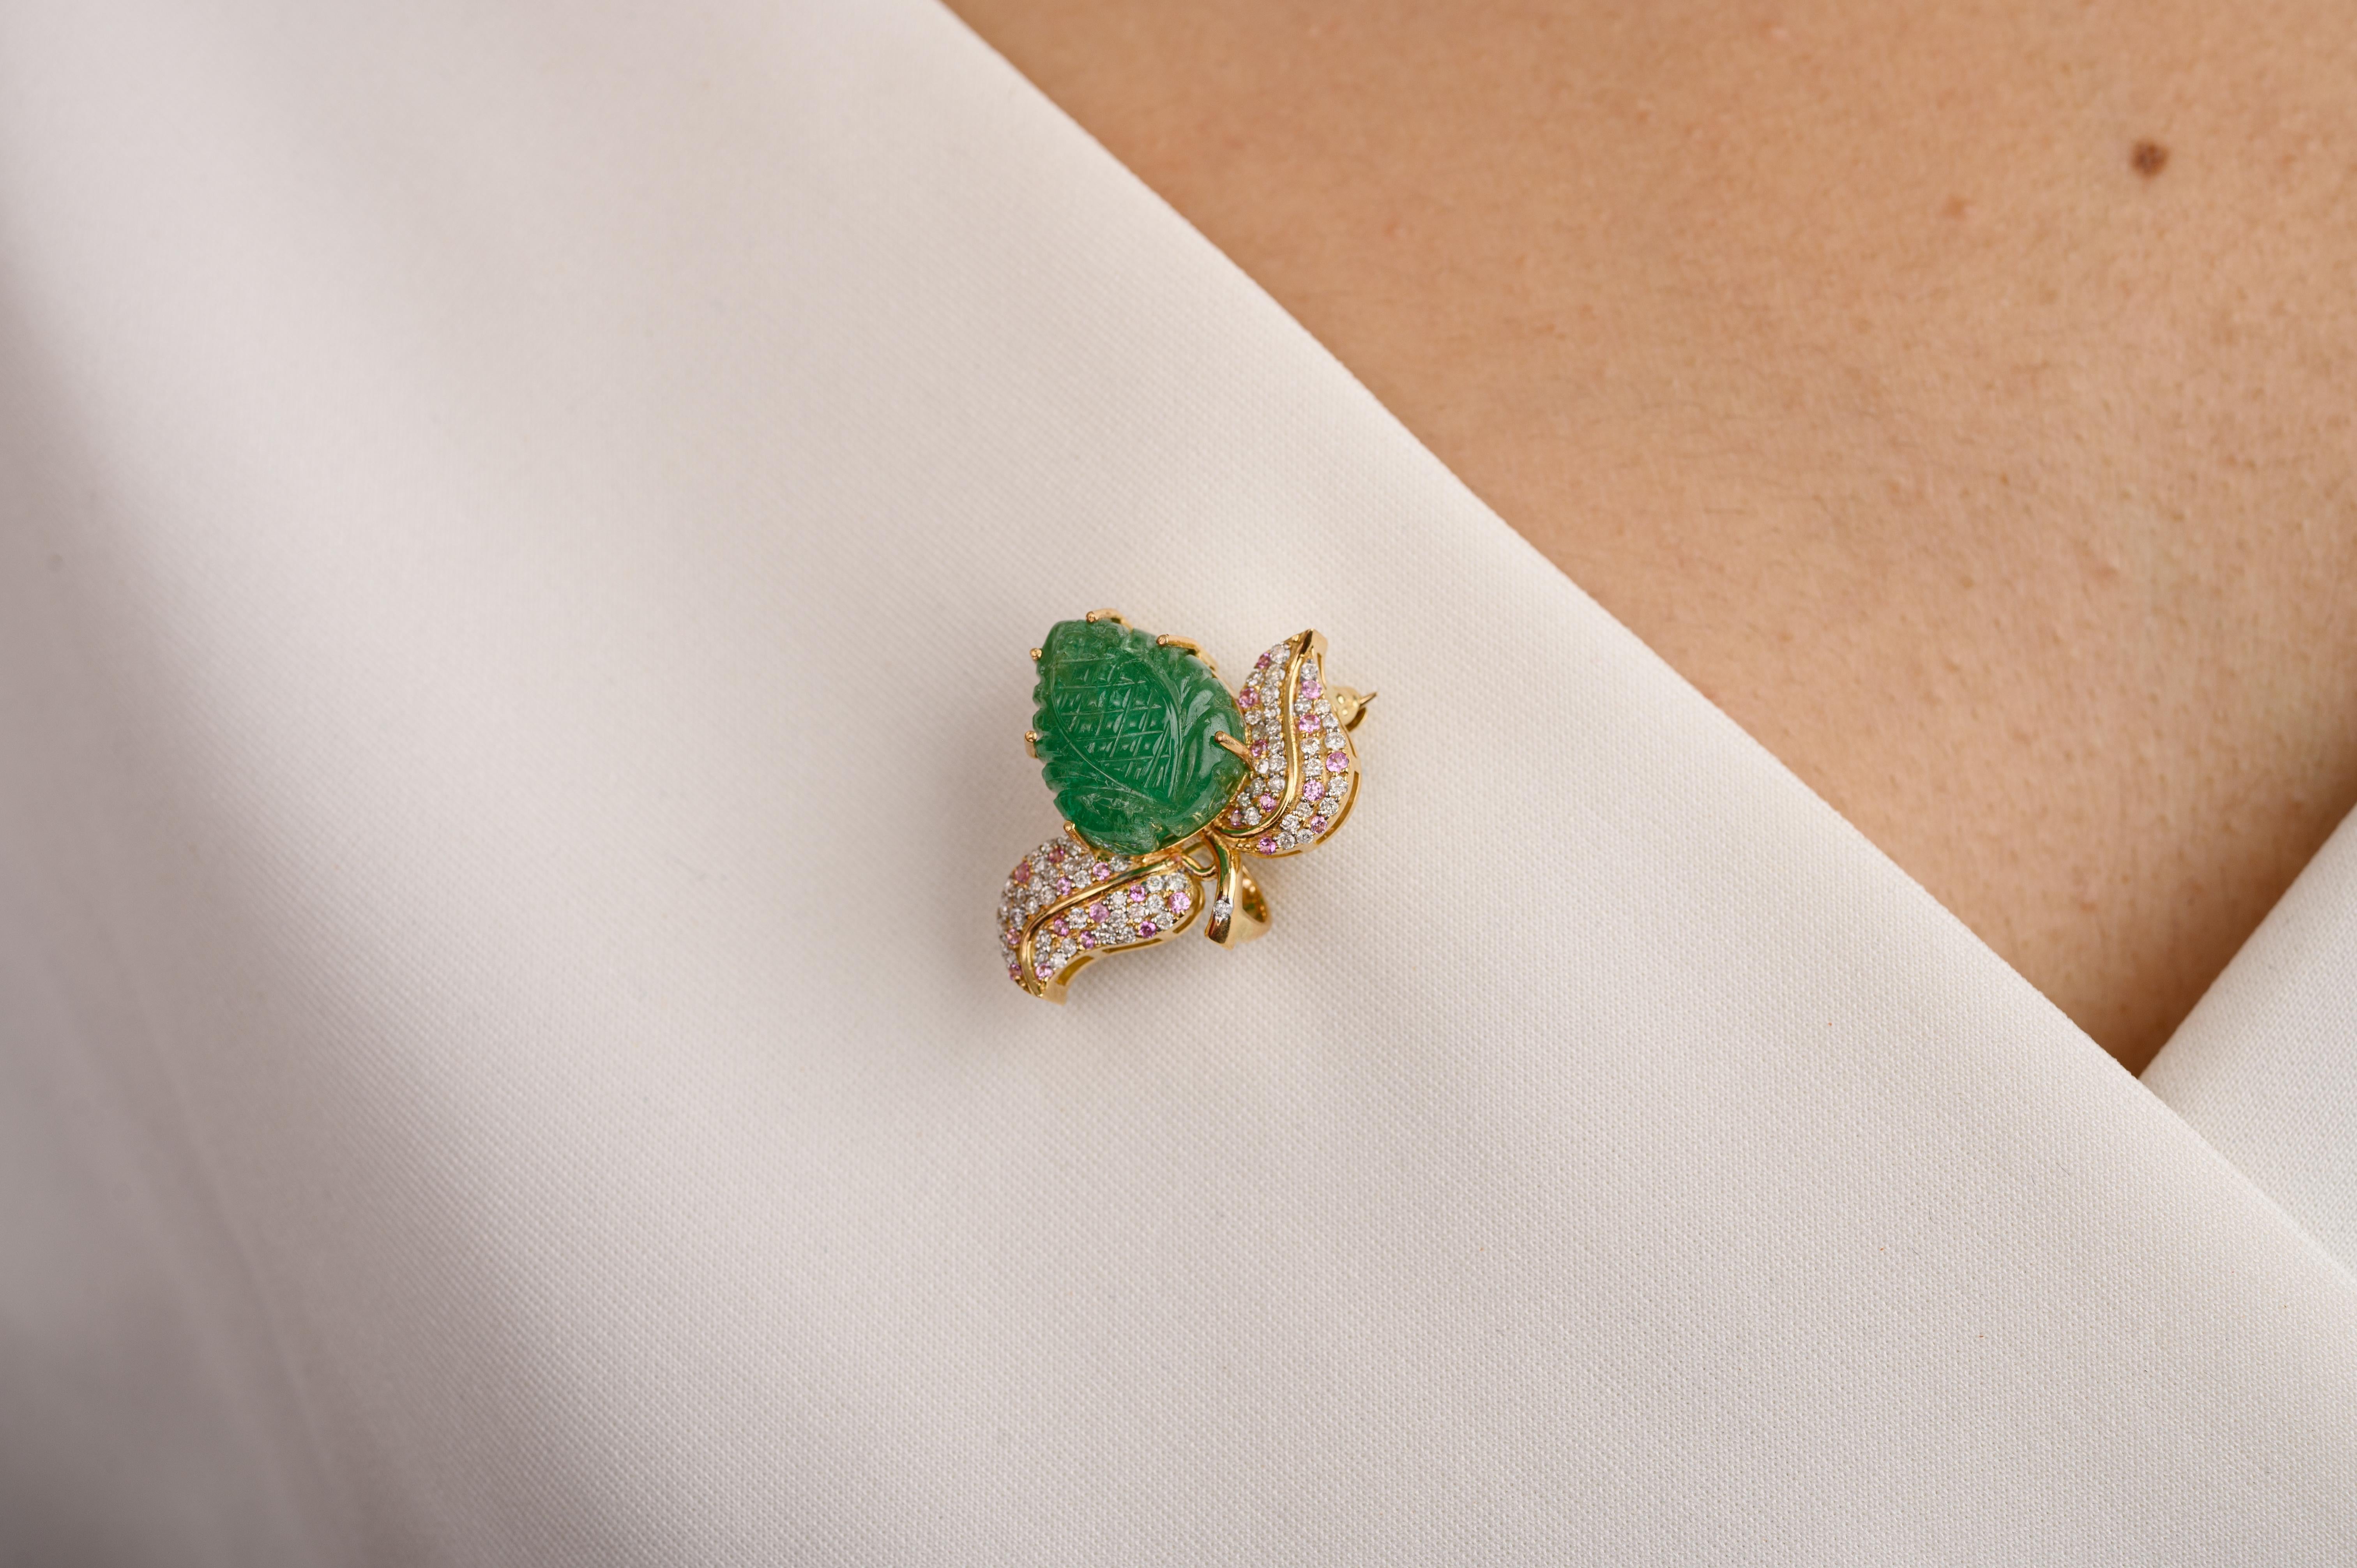 Unisex 8.88 Carat Carved Emerald Diamond Leaf Brooch Pin Gift Made in 18K Gold which is a fusion of surrealism and pop-art, designed to make a bold statement. Crafted with love and attention to detail, this features 8.88 carats of emerald which